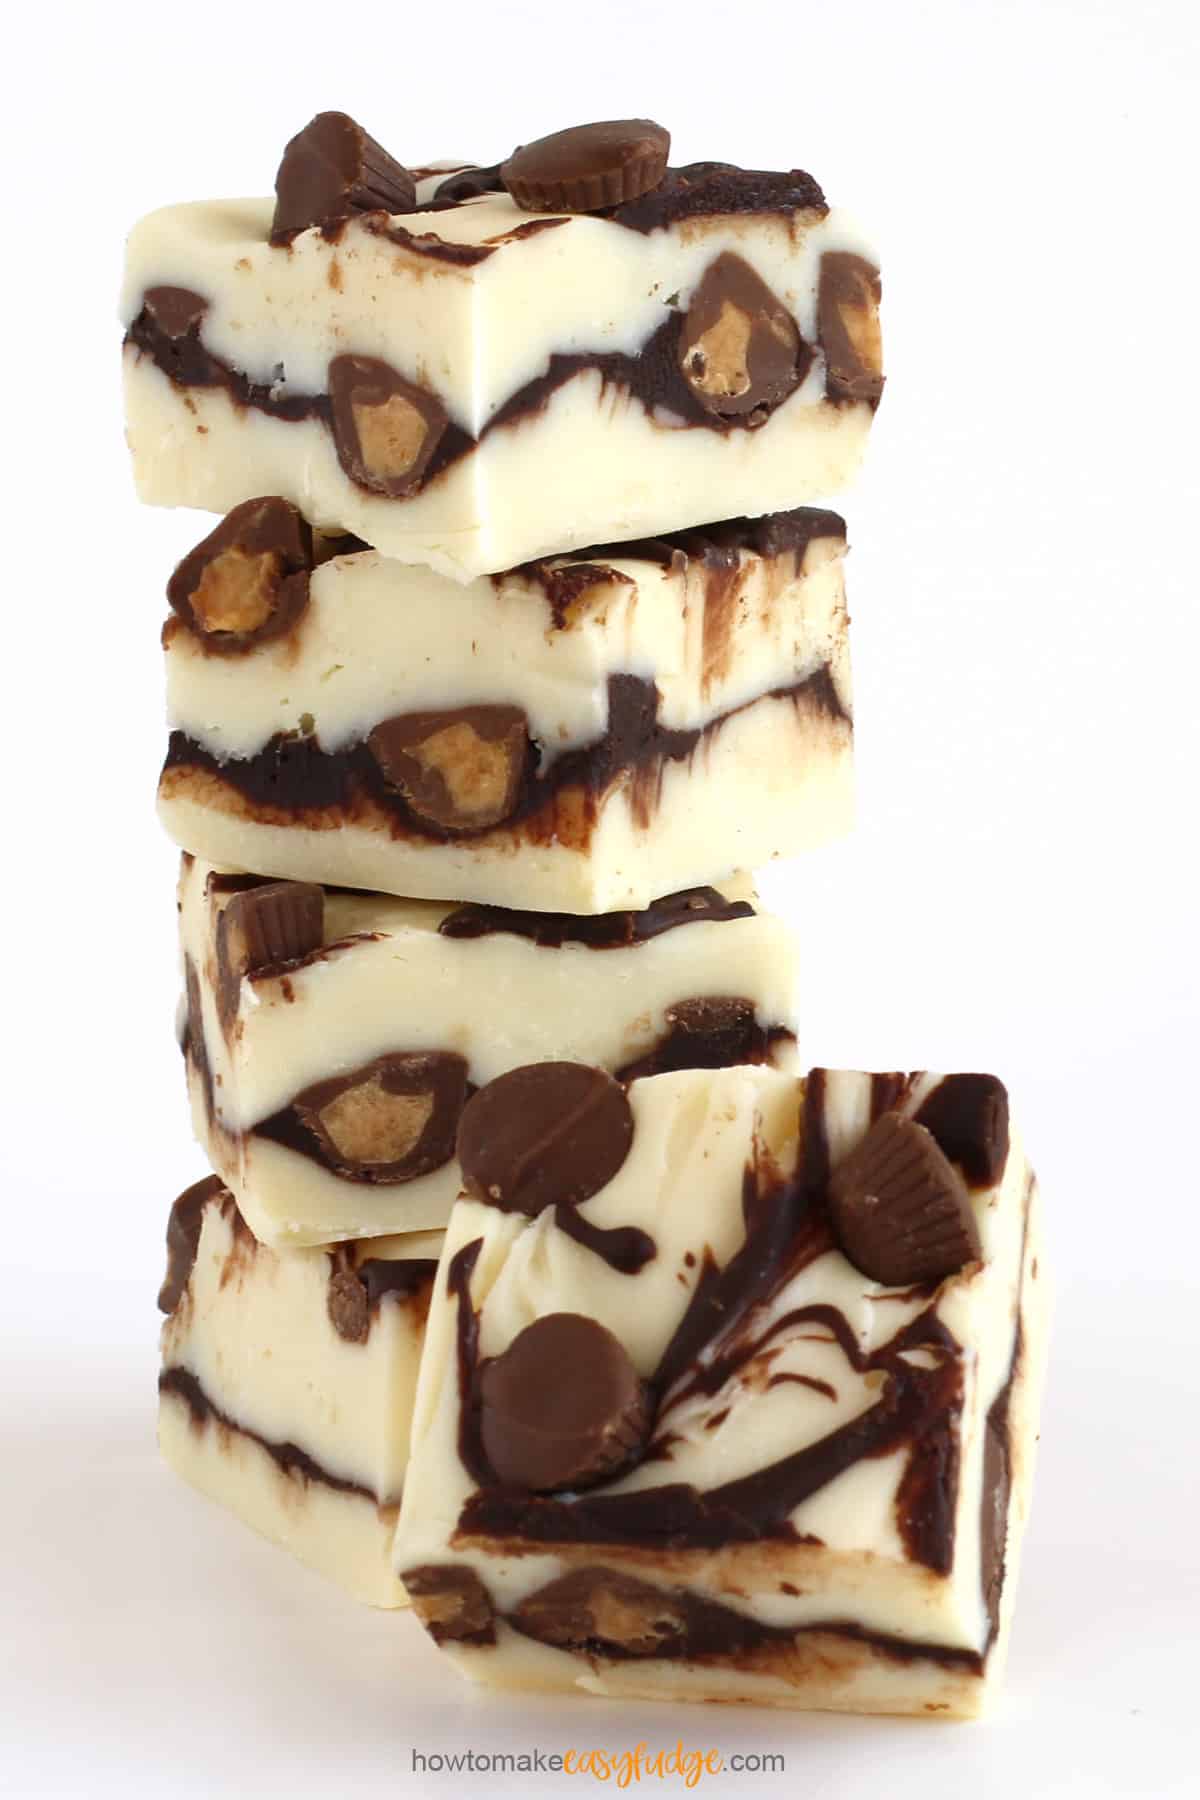 vanilla fudge swirled with chocolate and peanut butter cups